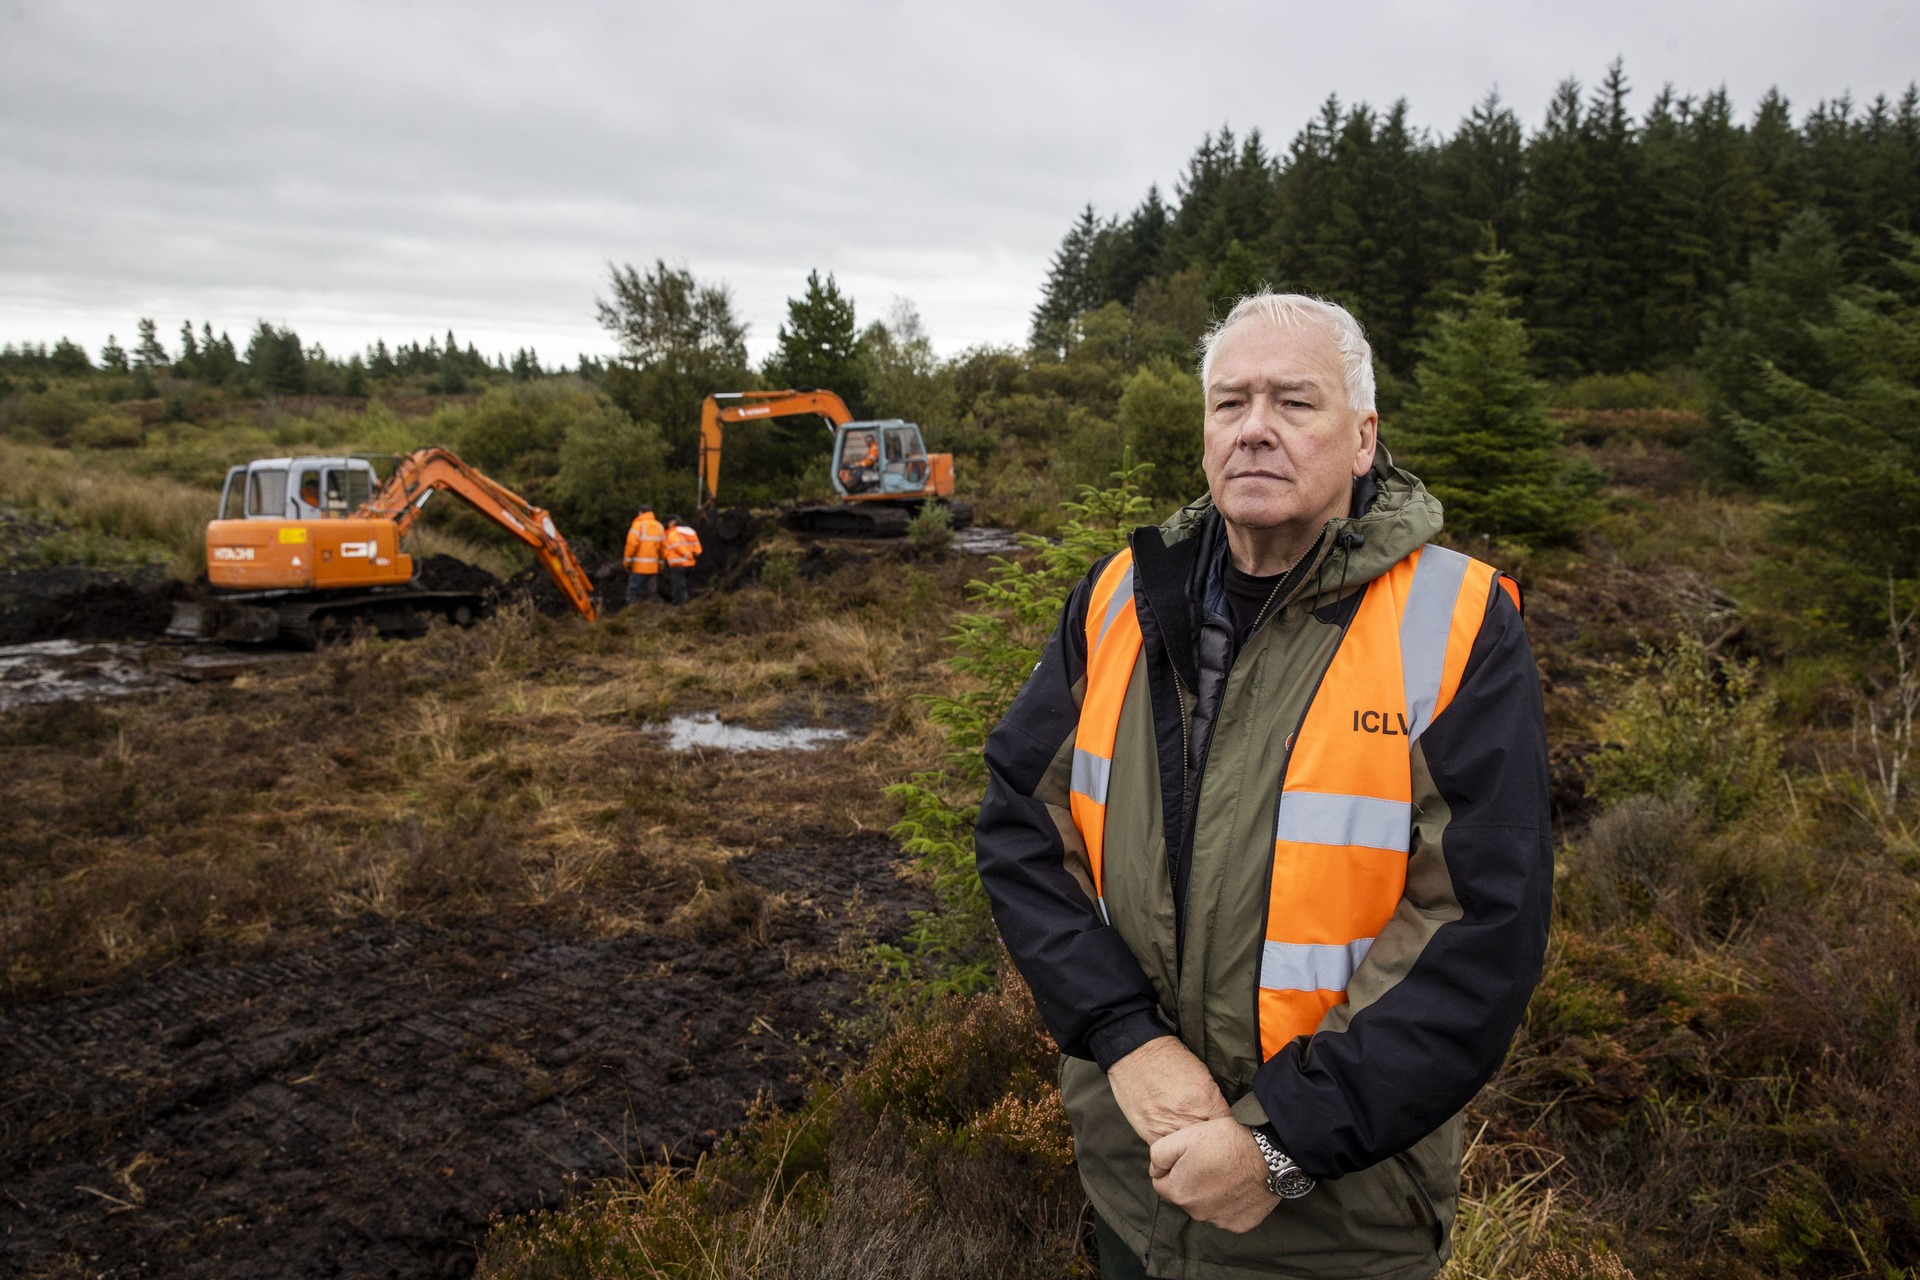 Jon Hill, of the Independent Commission for the Location of Victims’ Remains, stands besides excavators at Bragan bog near Emyvale in Co Monaghan.